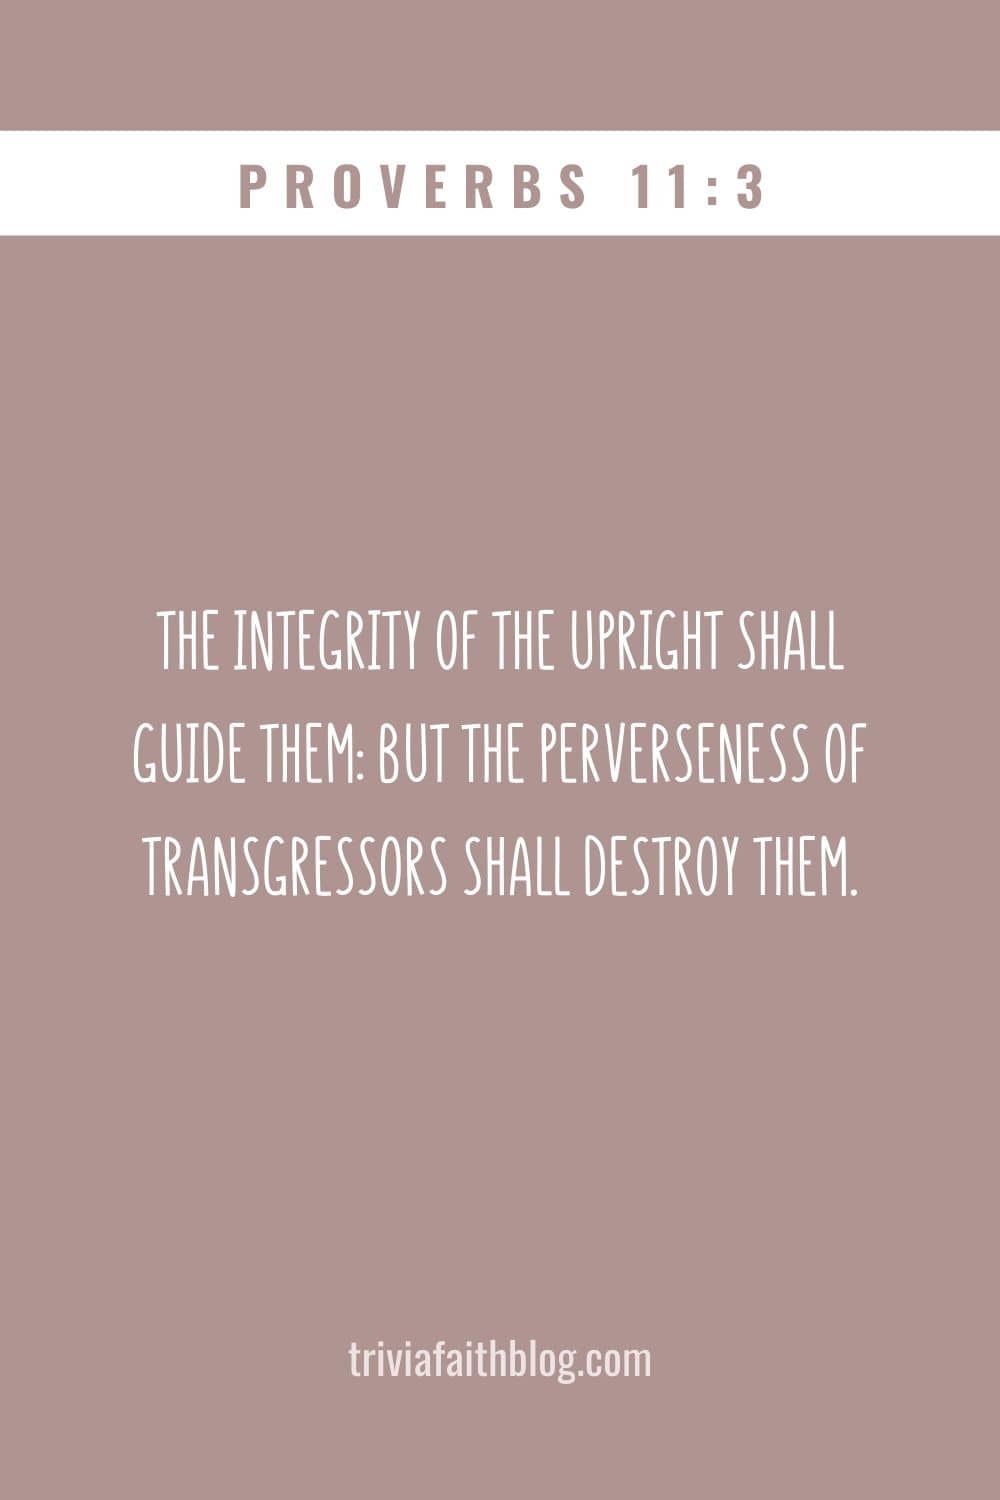 The integrity of the upright shall guide them but the perverseness of transgressors shall destroy them